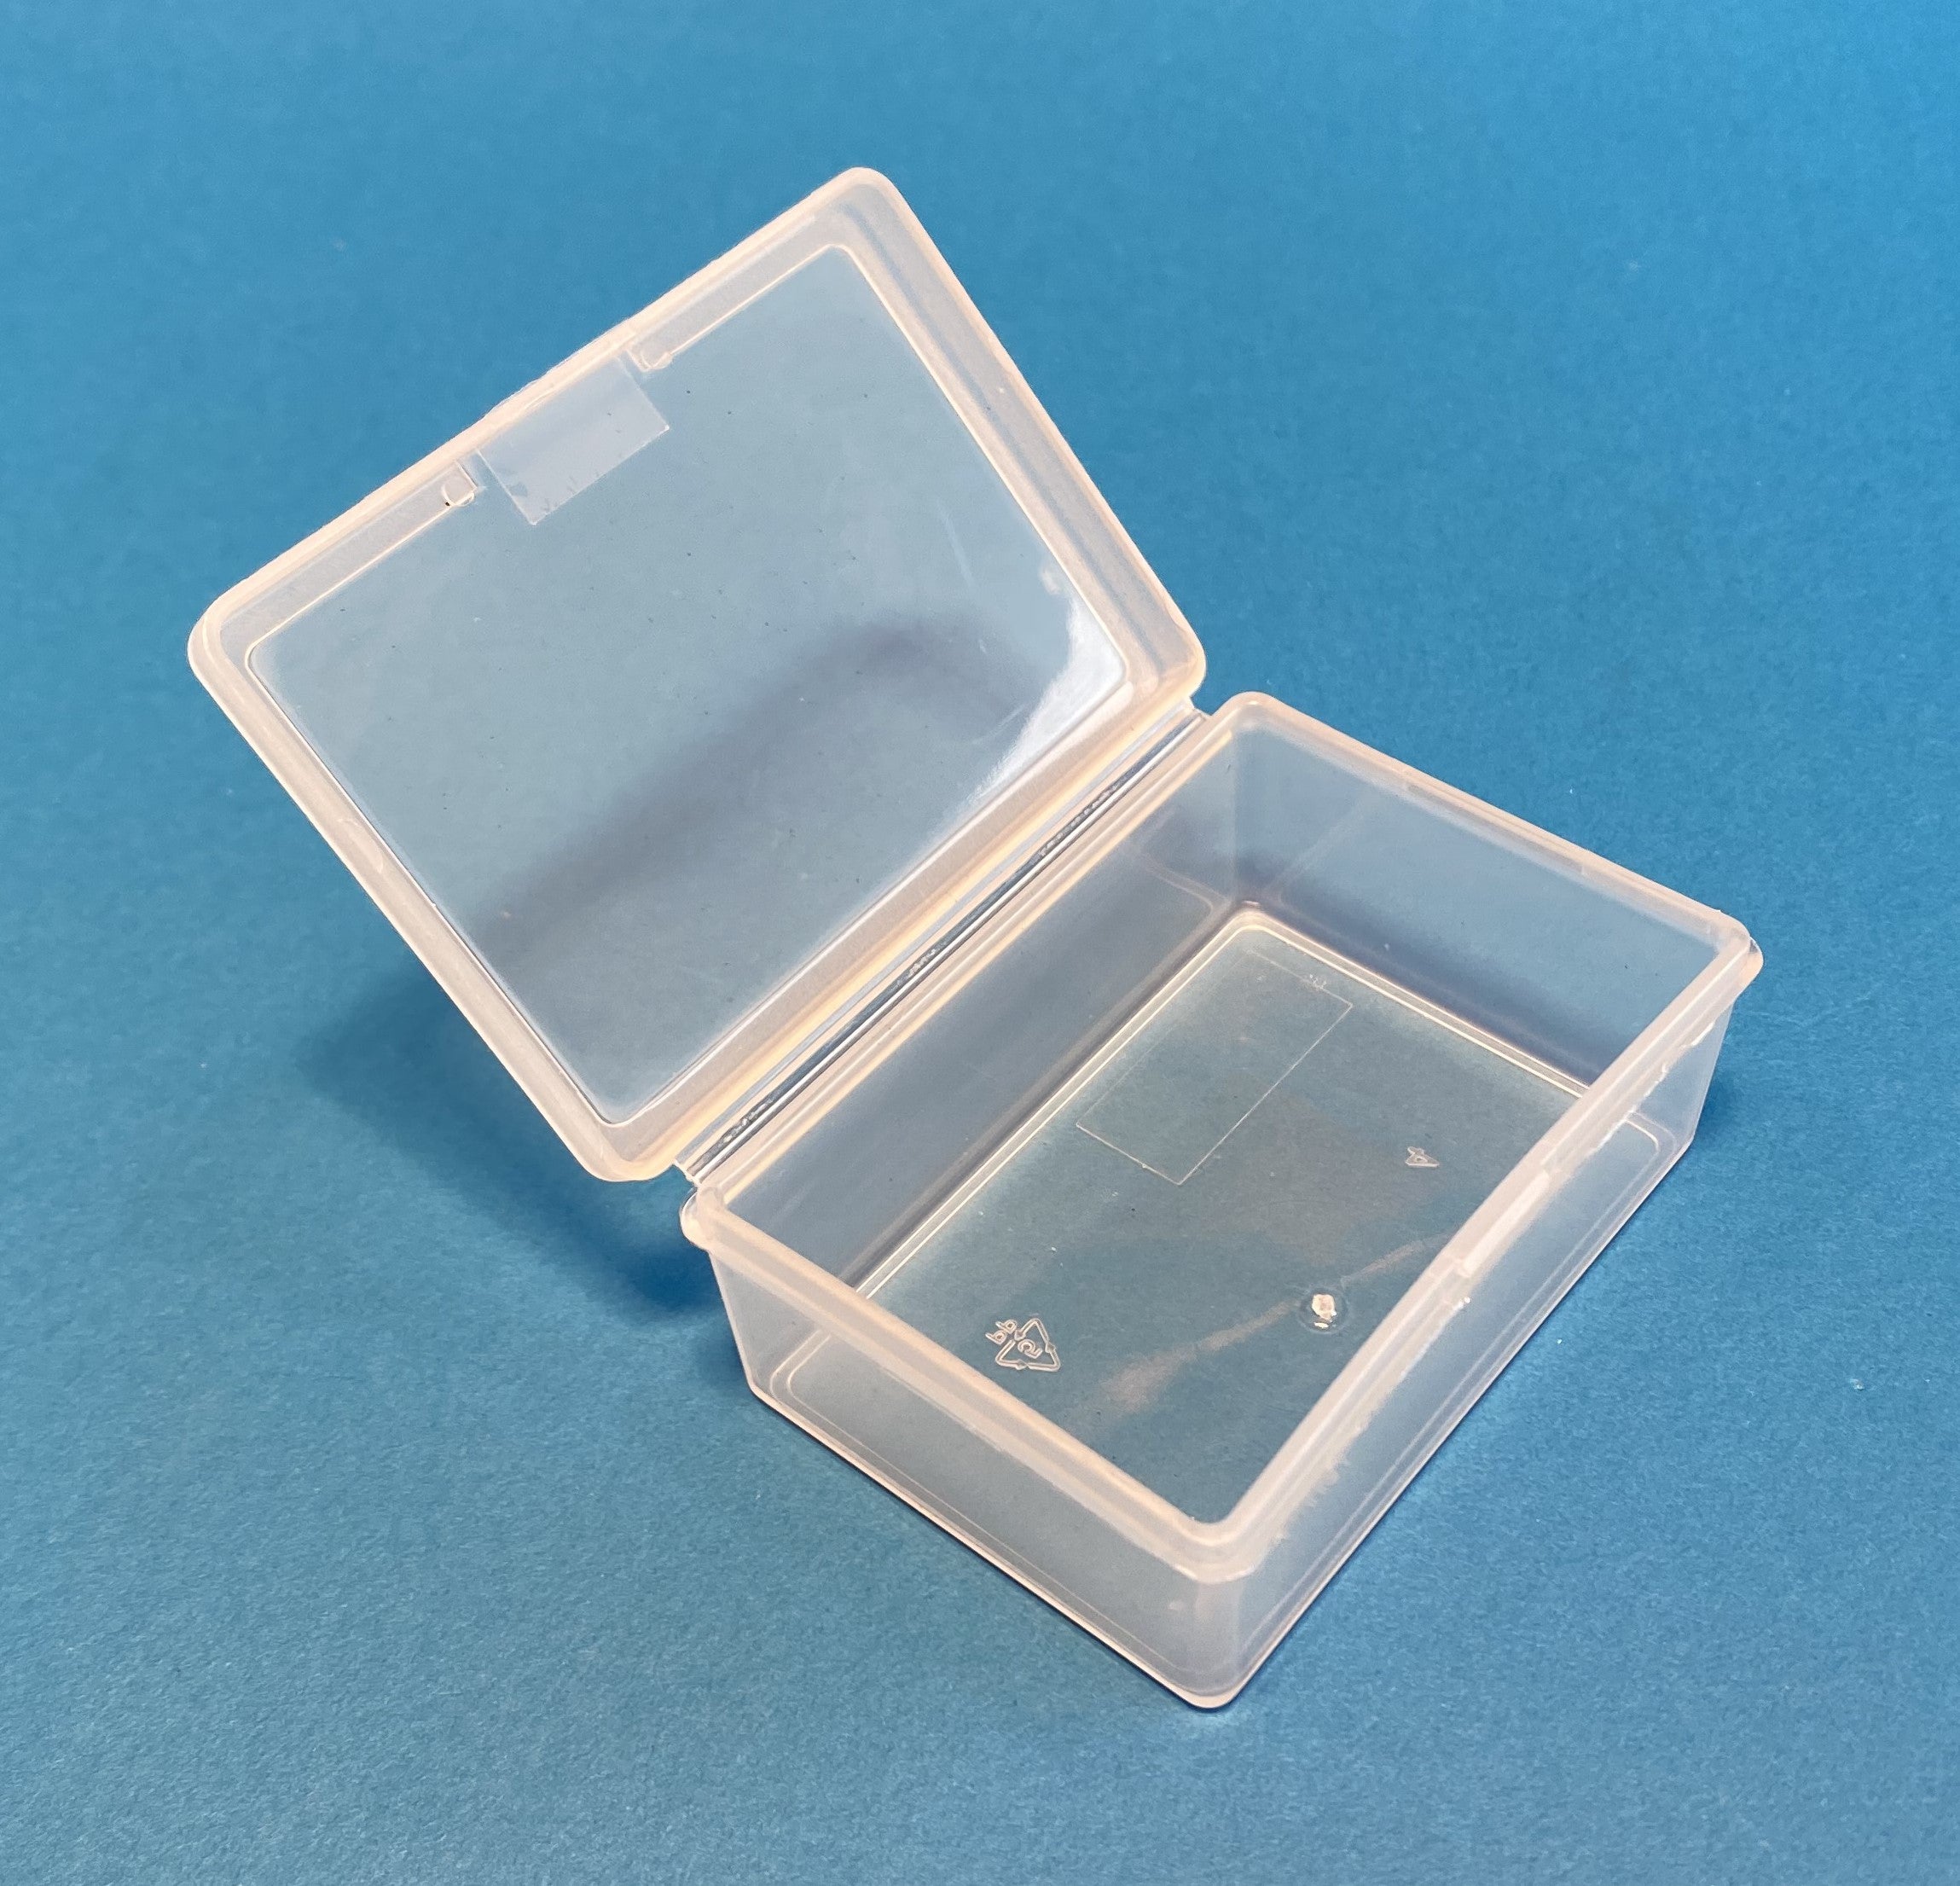 Plastic Cases - All from Smallest to Largest